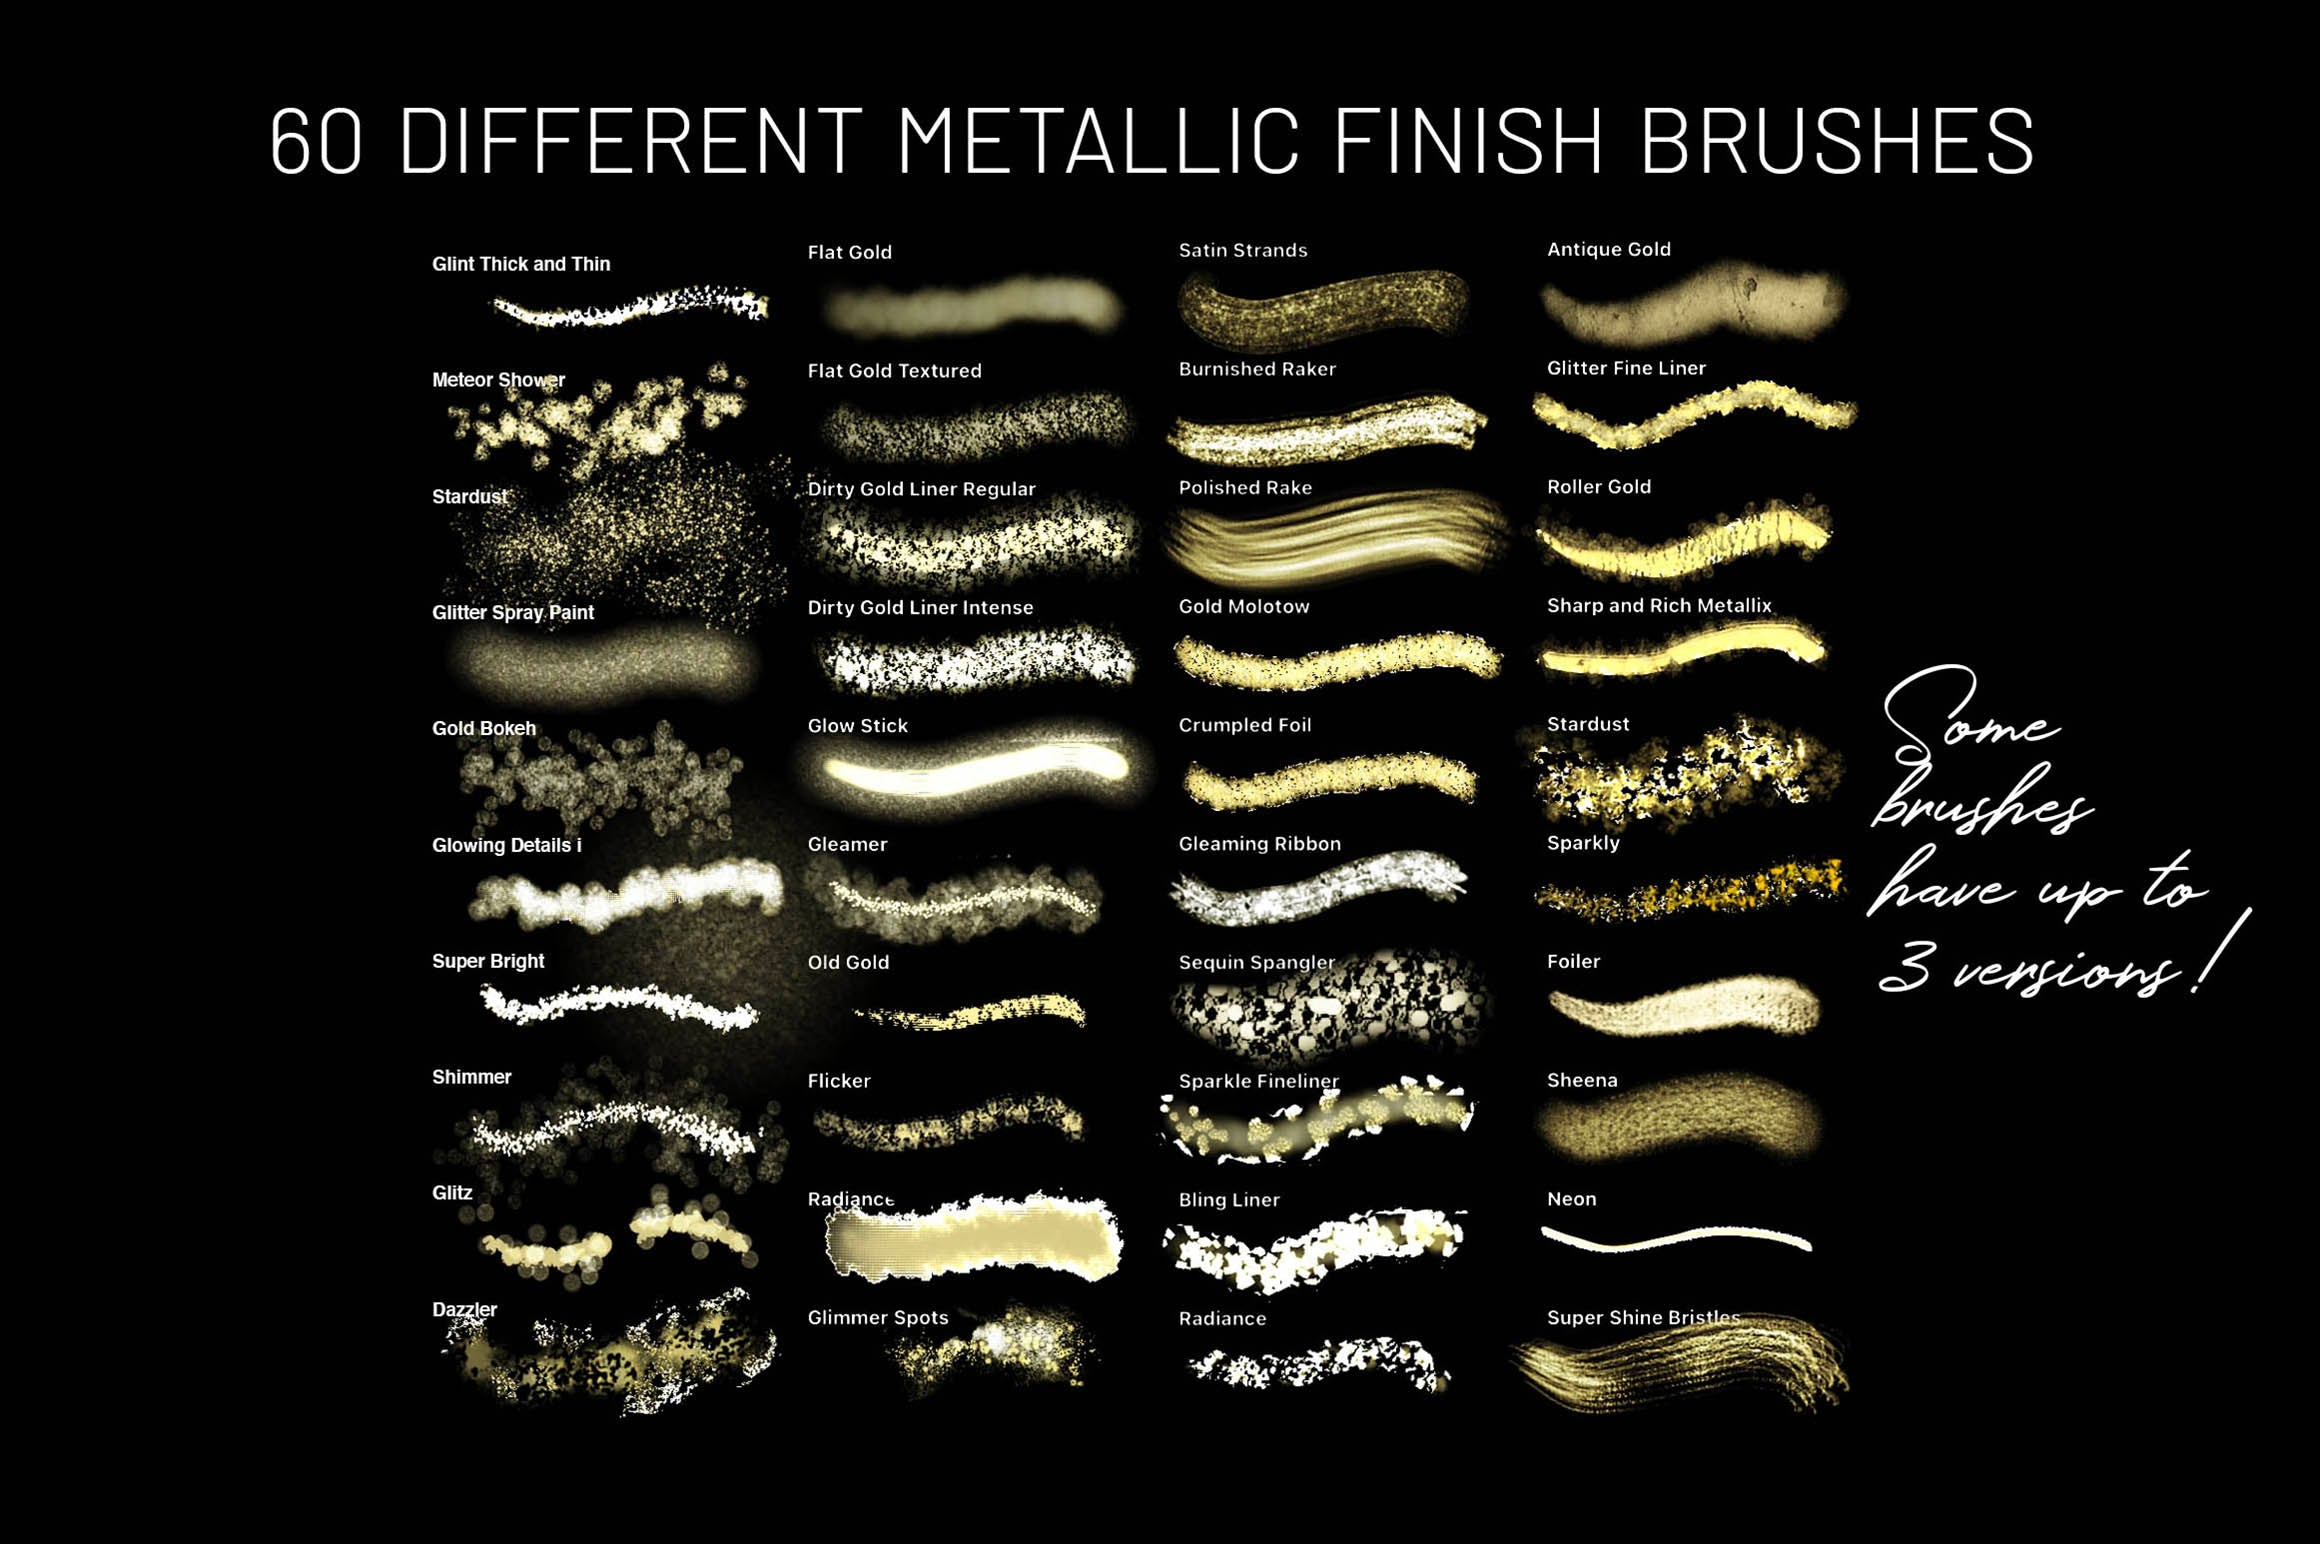 Volume 33 Comprehensive Collection ‘All That Glitters’ Brushes and Textures